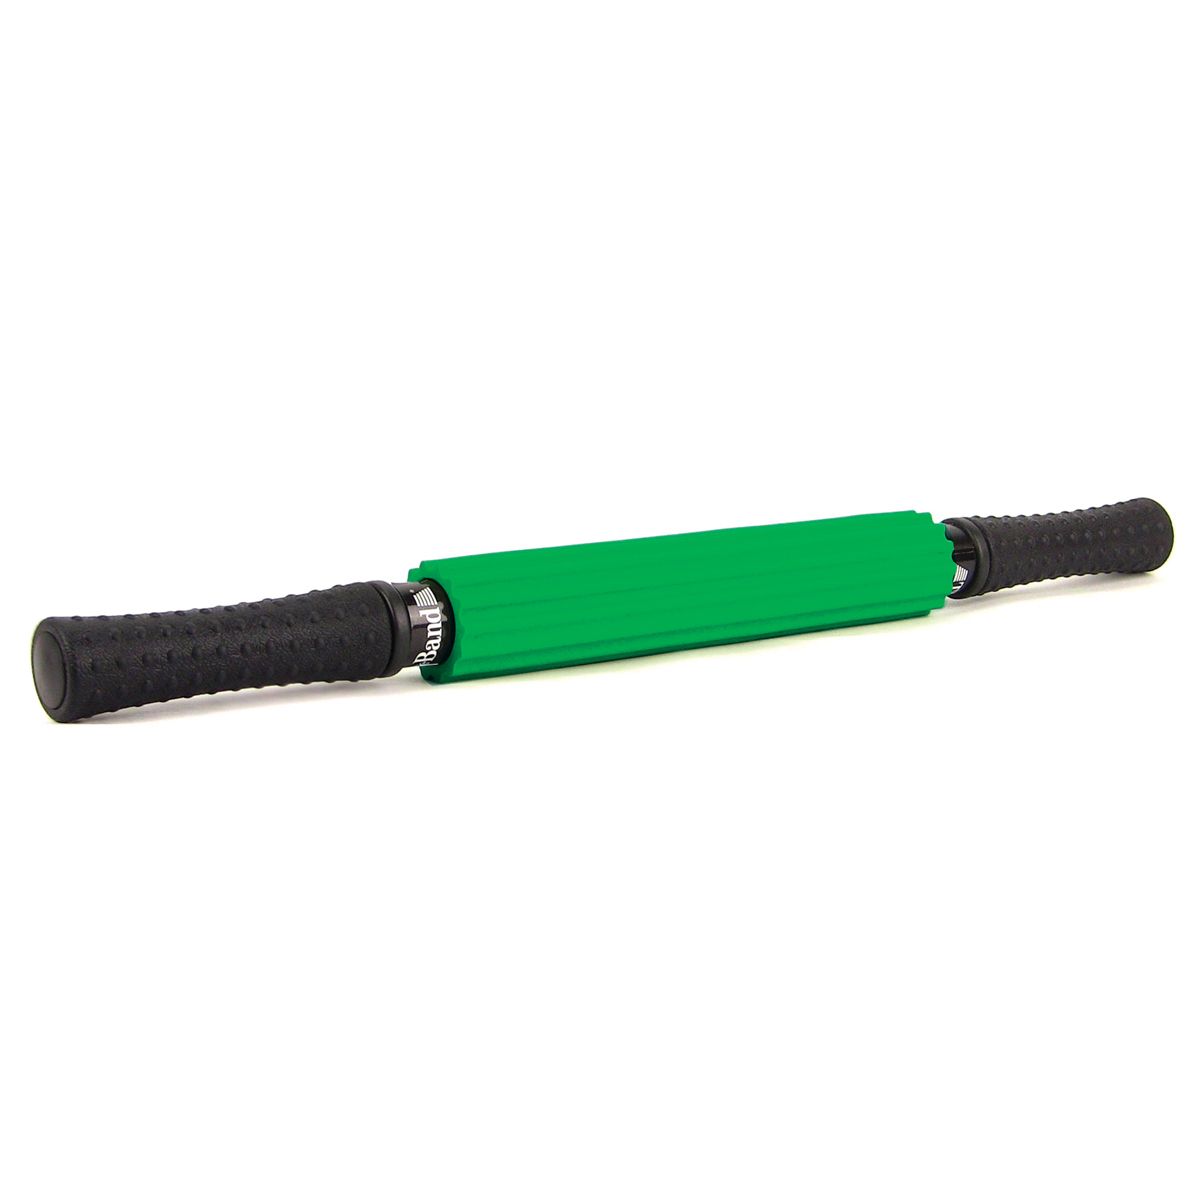 Black and green TheraBand roller massager tool